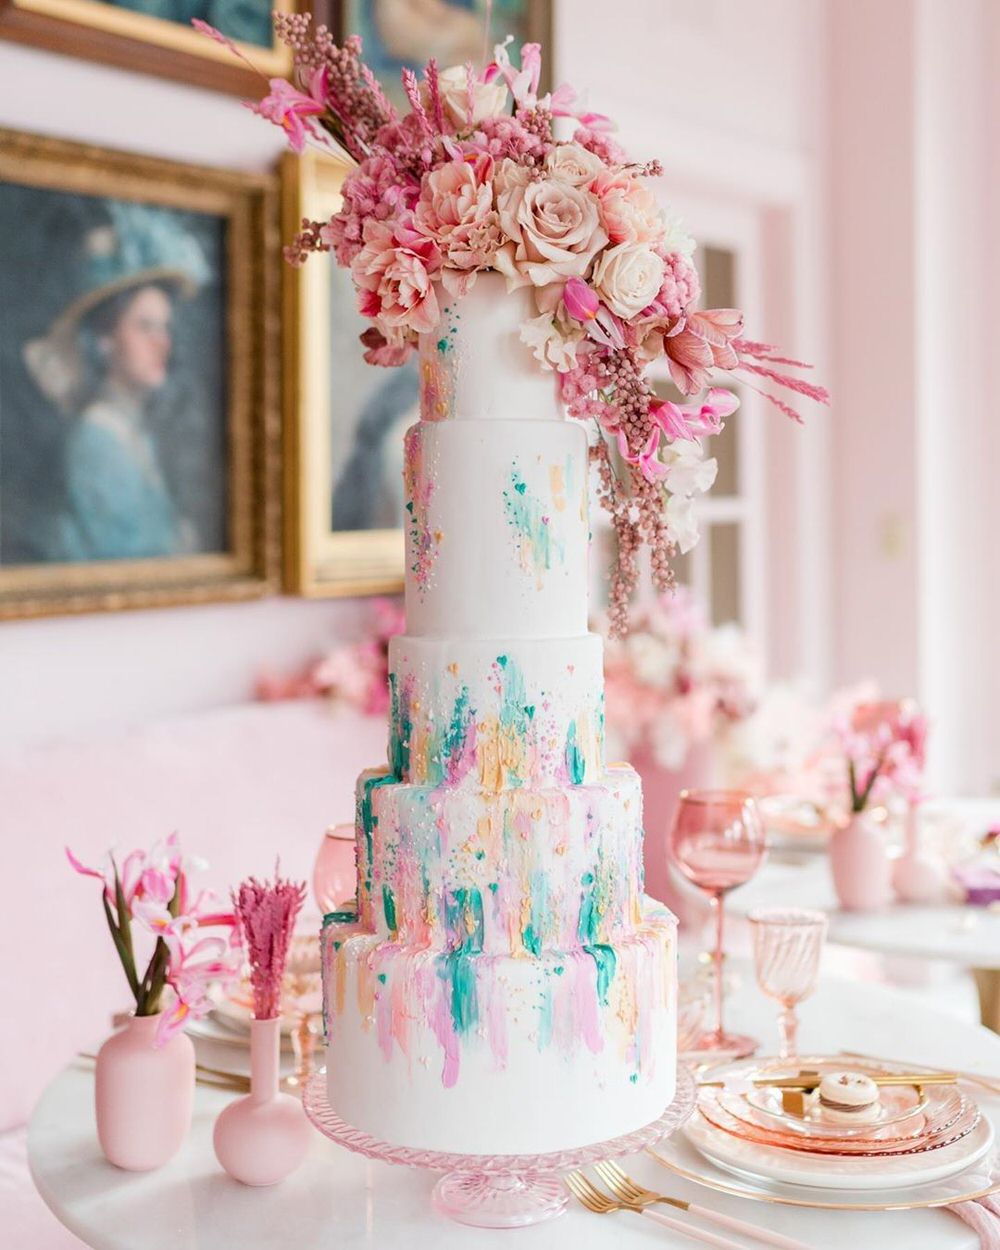 22 Sophisticated Tiered Wedding Cakes You Will Love | Deer Pearl Flowers